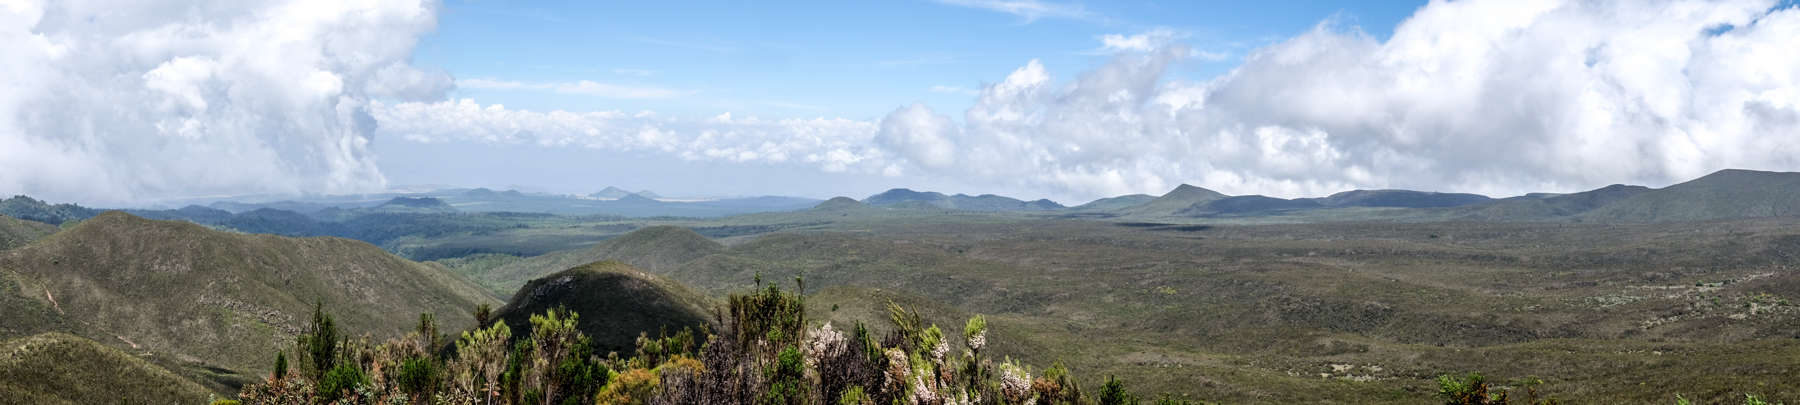 A panoramic view of the green Kilimanjaro valley bed from an elevated viewpoint of the Shira Ridge